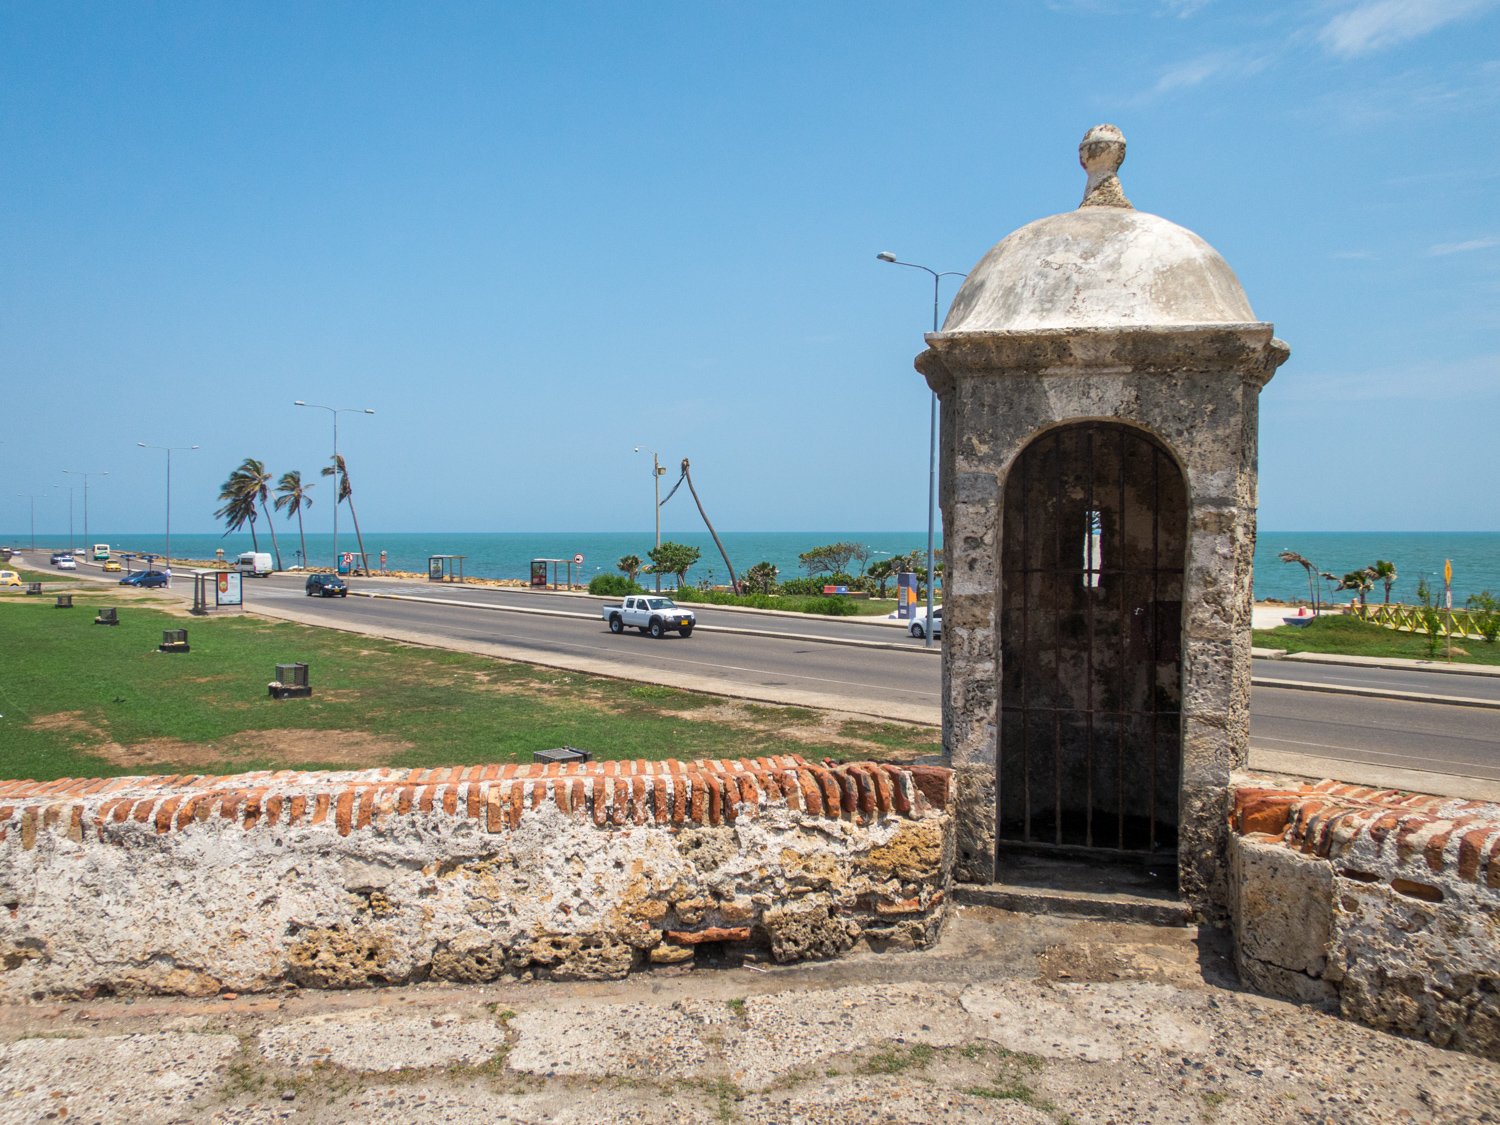 Walking the old city walls is one of the best things to do in Cartagena, Colombia